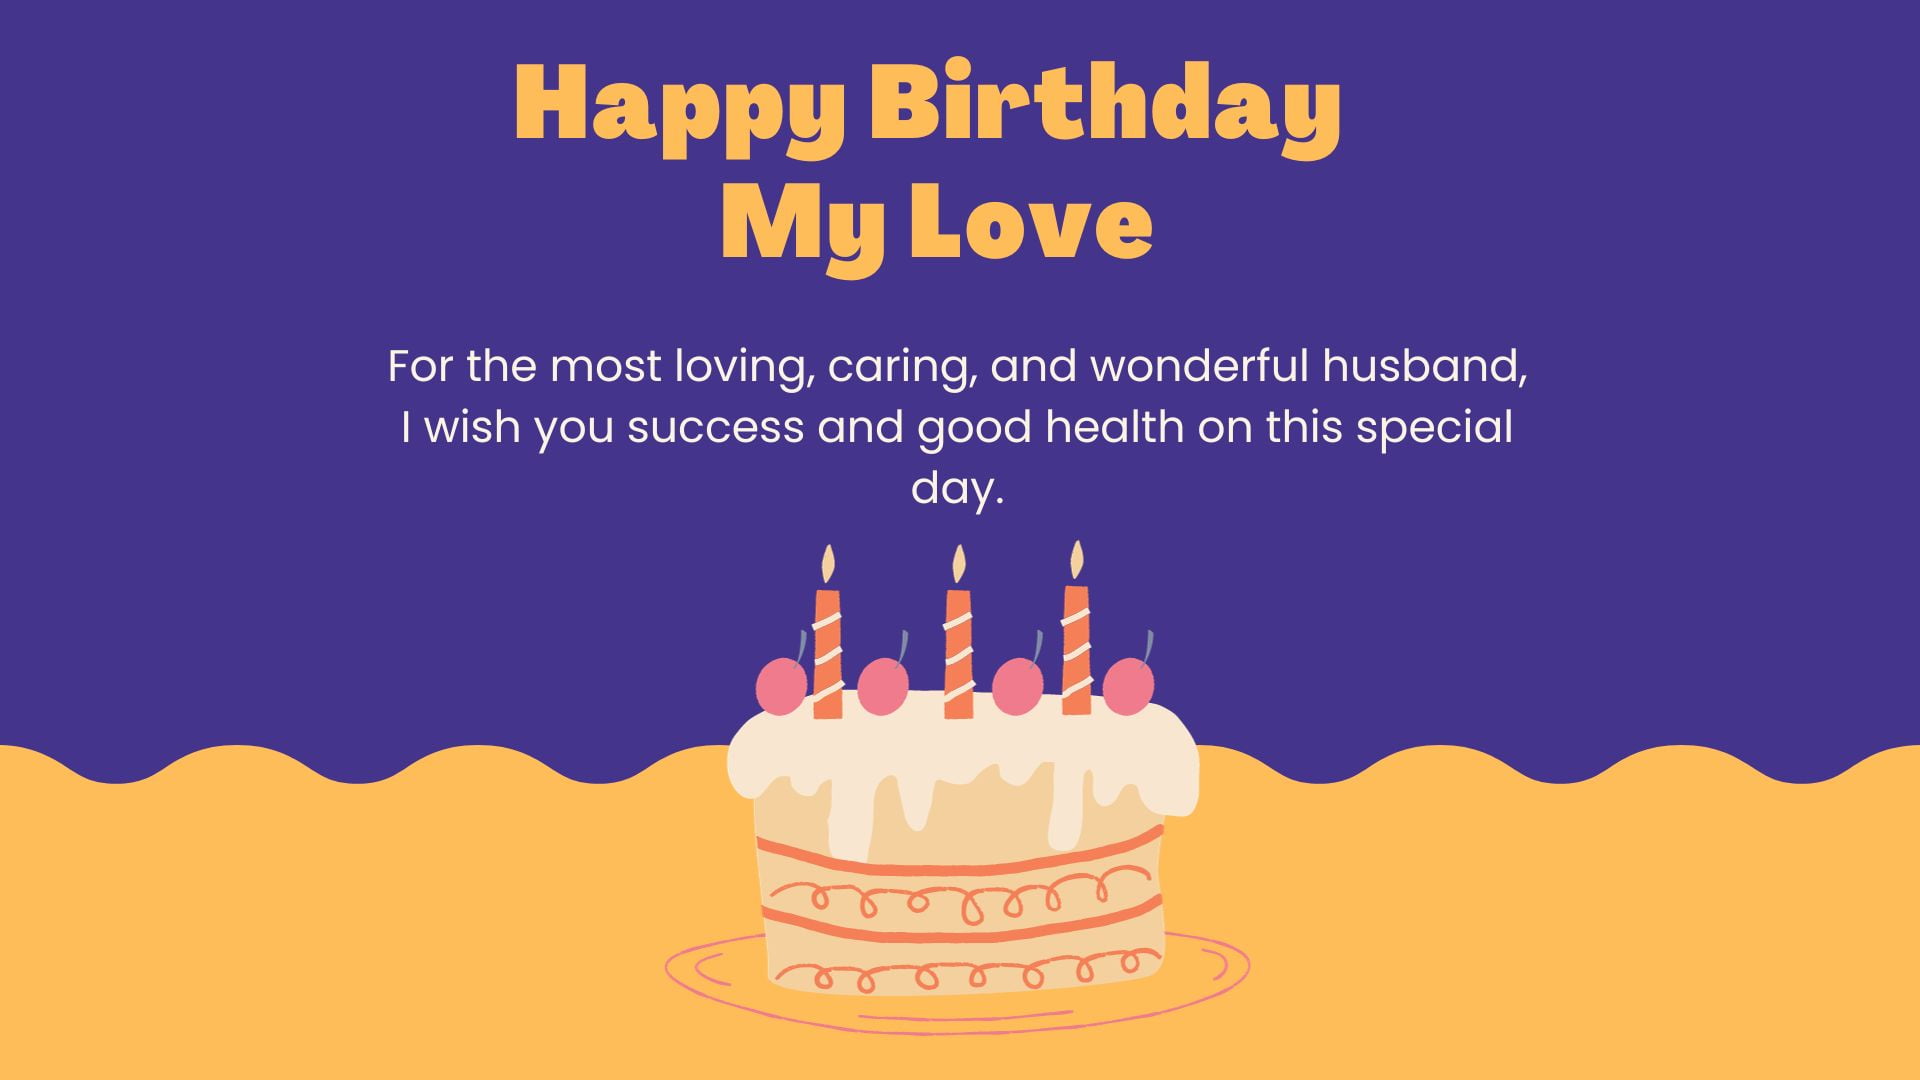 Soulmate romantic birthday wishes for husband from wife